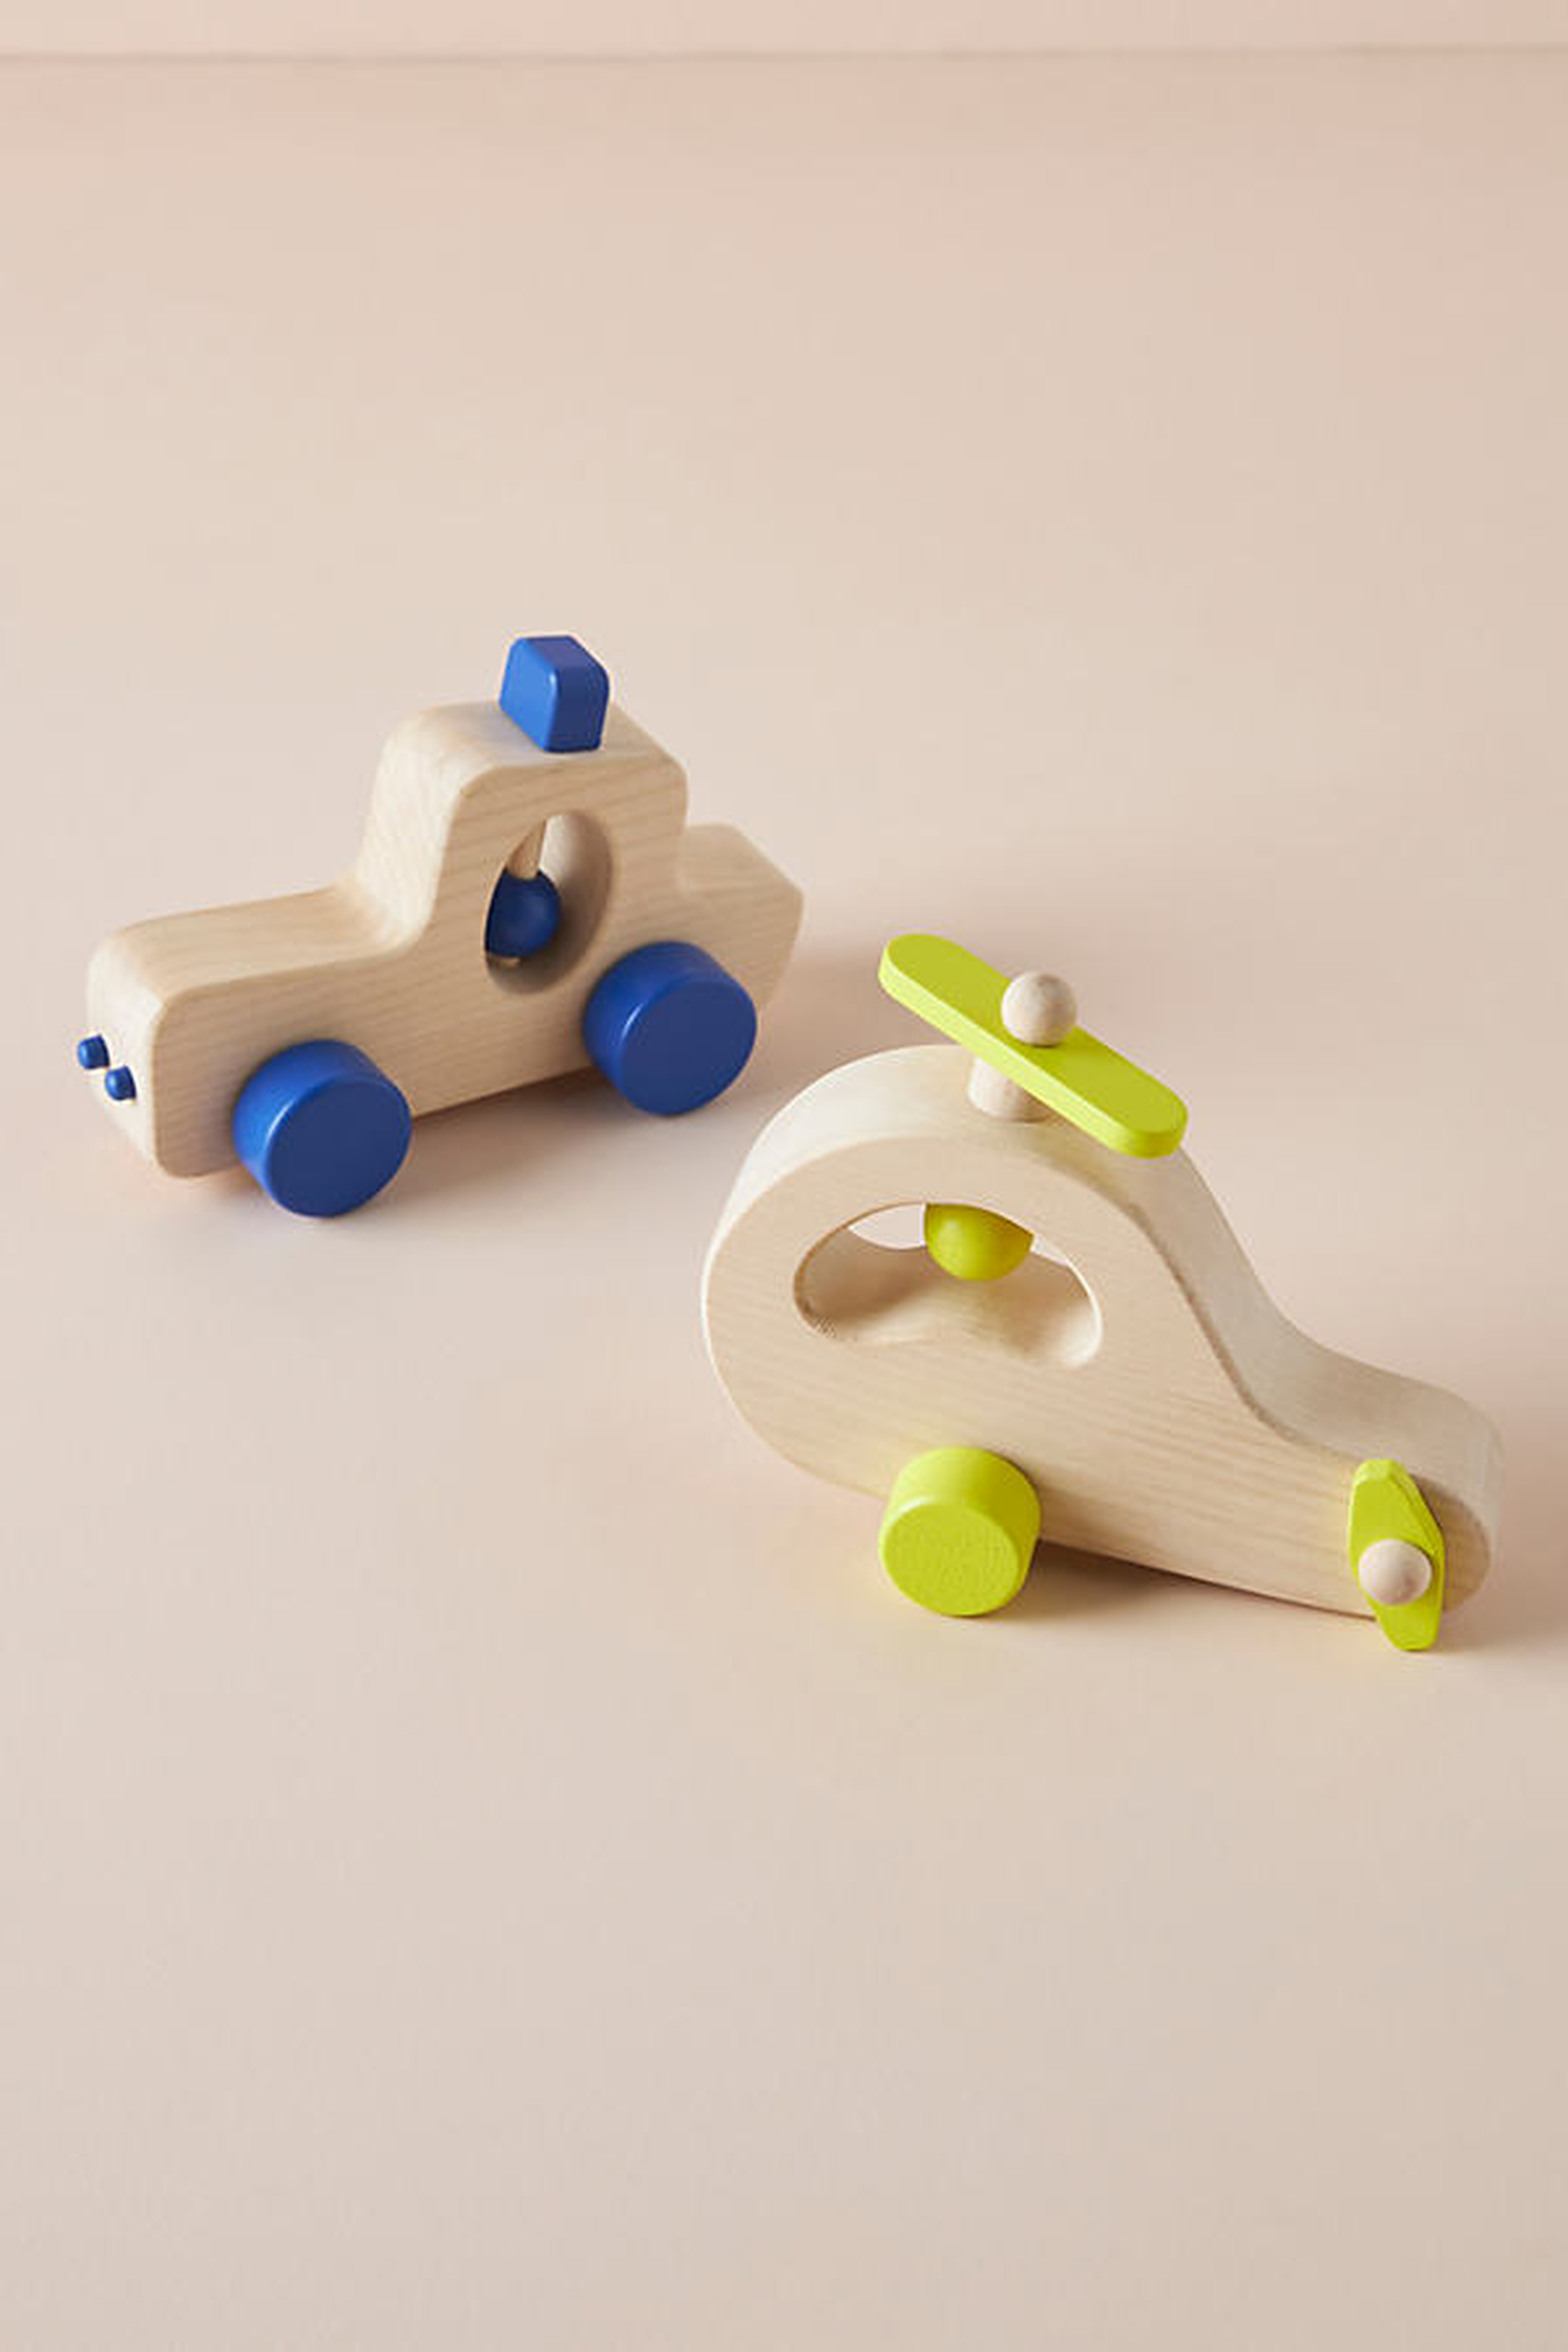 Wooden Vehicle Toy By Anthropologie in Green - Anthropologie